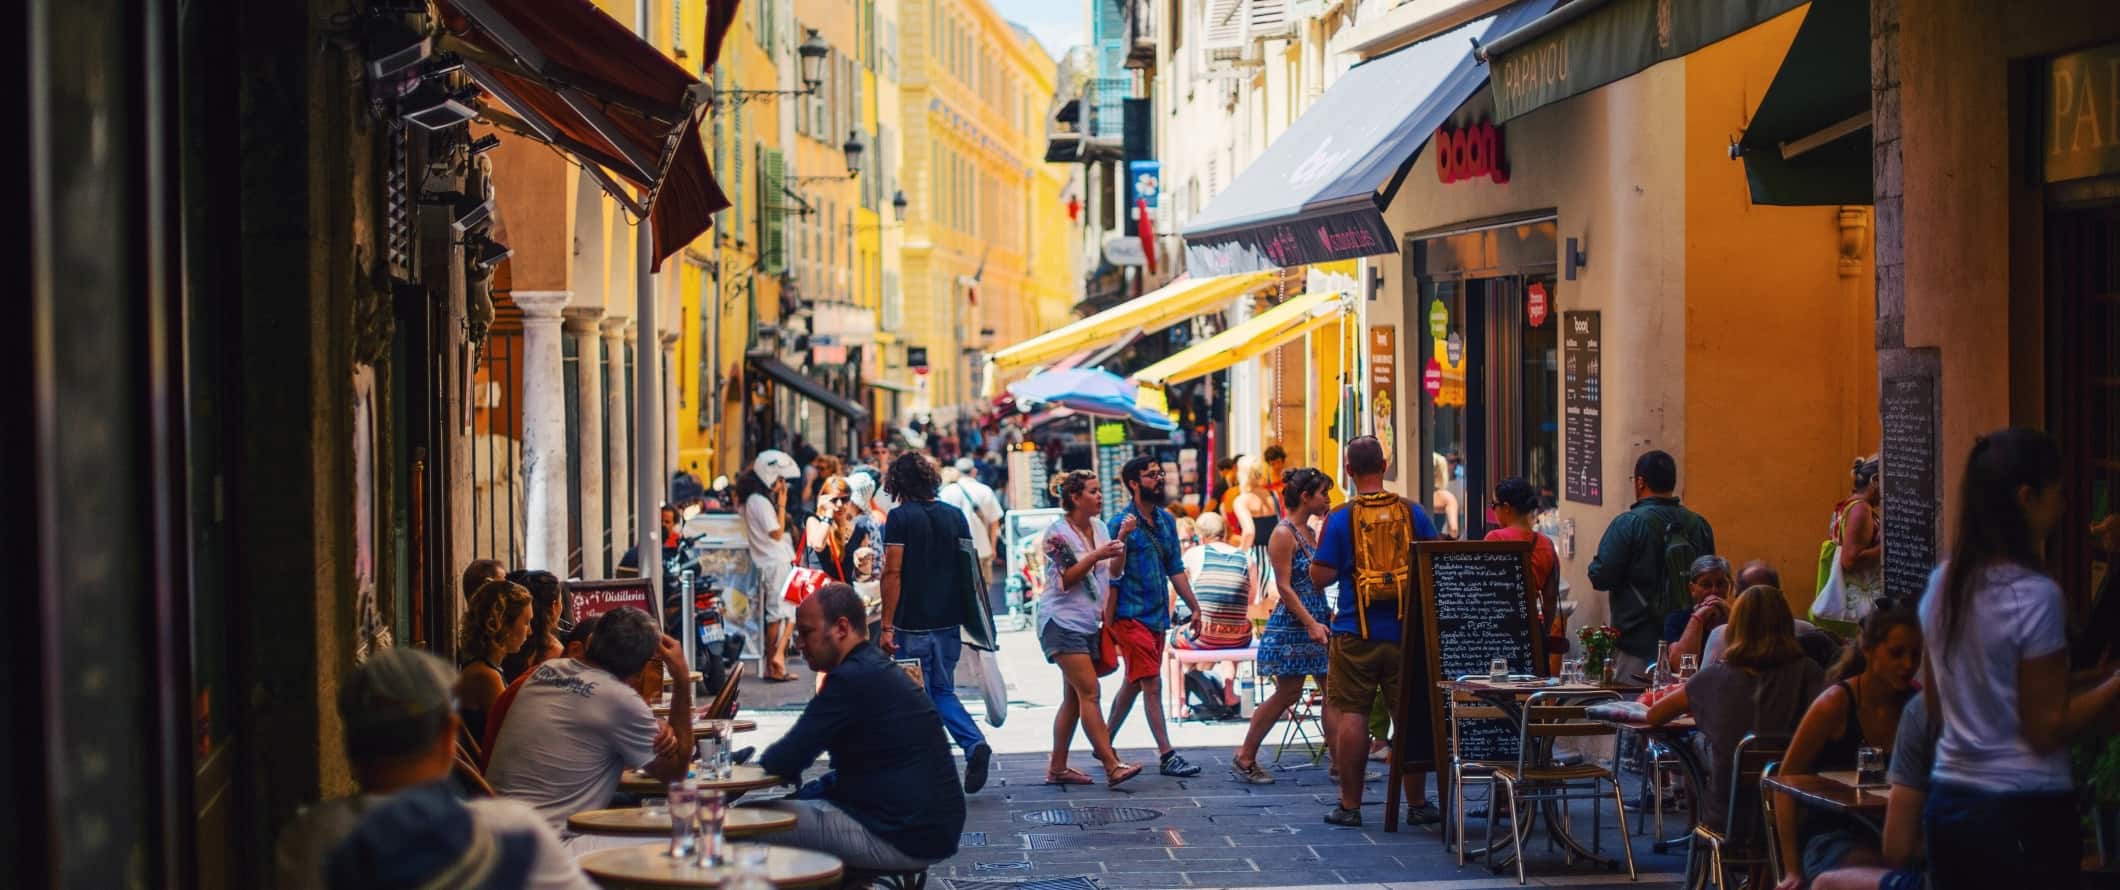 A busy pedestrian street filled with people walking around and sitting down at outdoor cafes in the old town in Nice, France